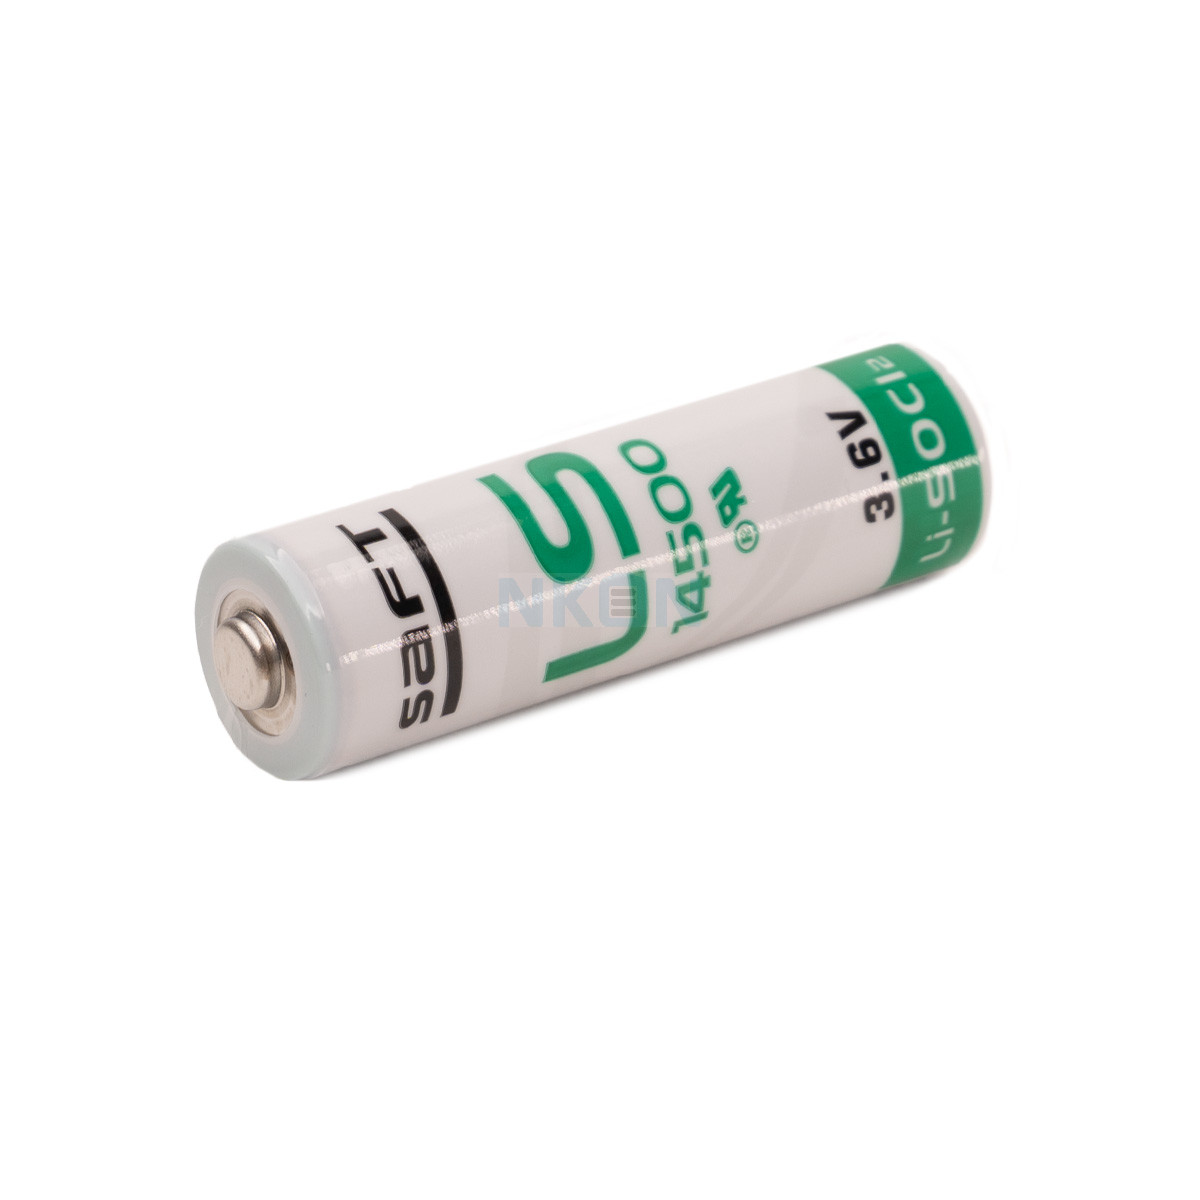 HOWING (50 Pack) LS14500 3.6 v Lithium AA Battery for SAFT